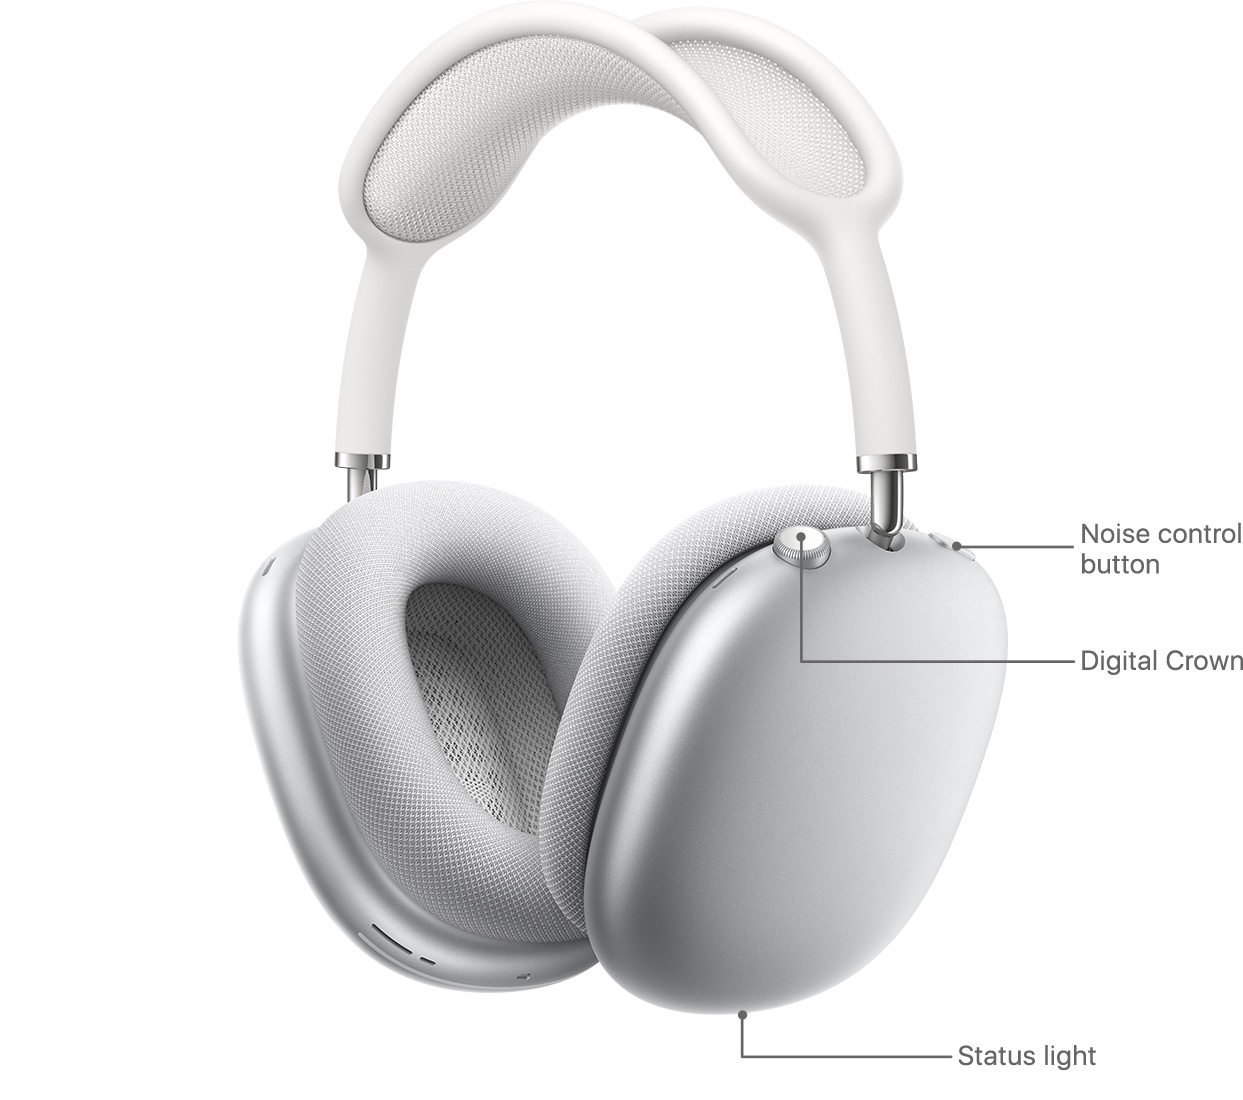 AirPods Max Digital Crown direction - an image showing button layout on the headphones